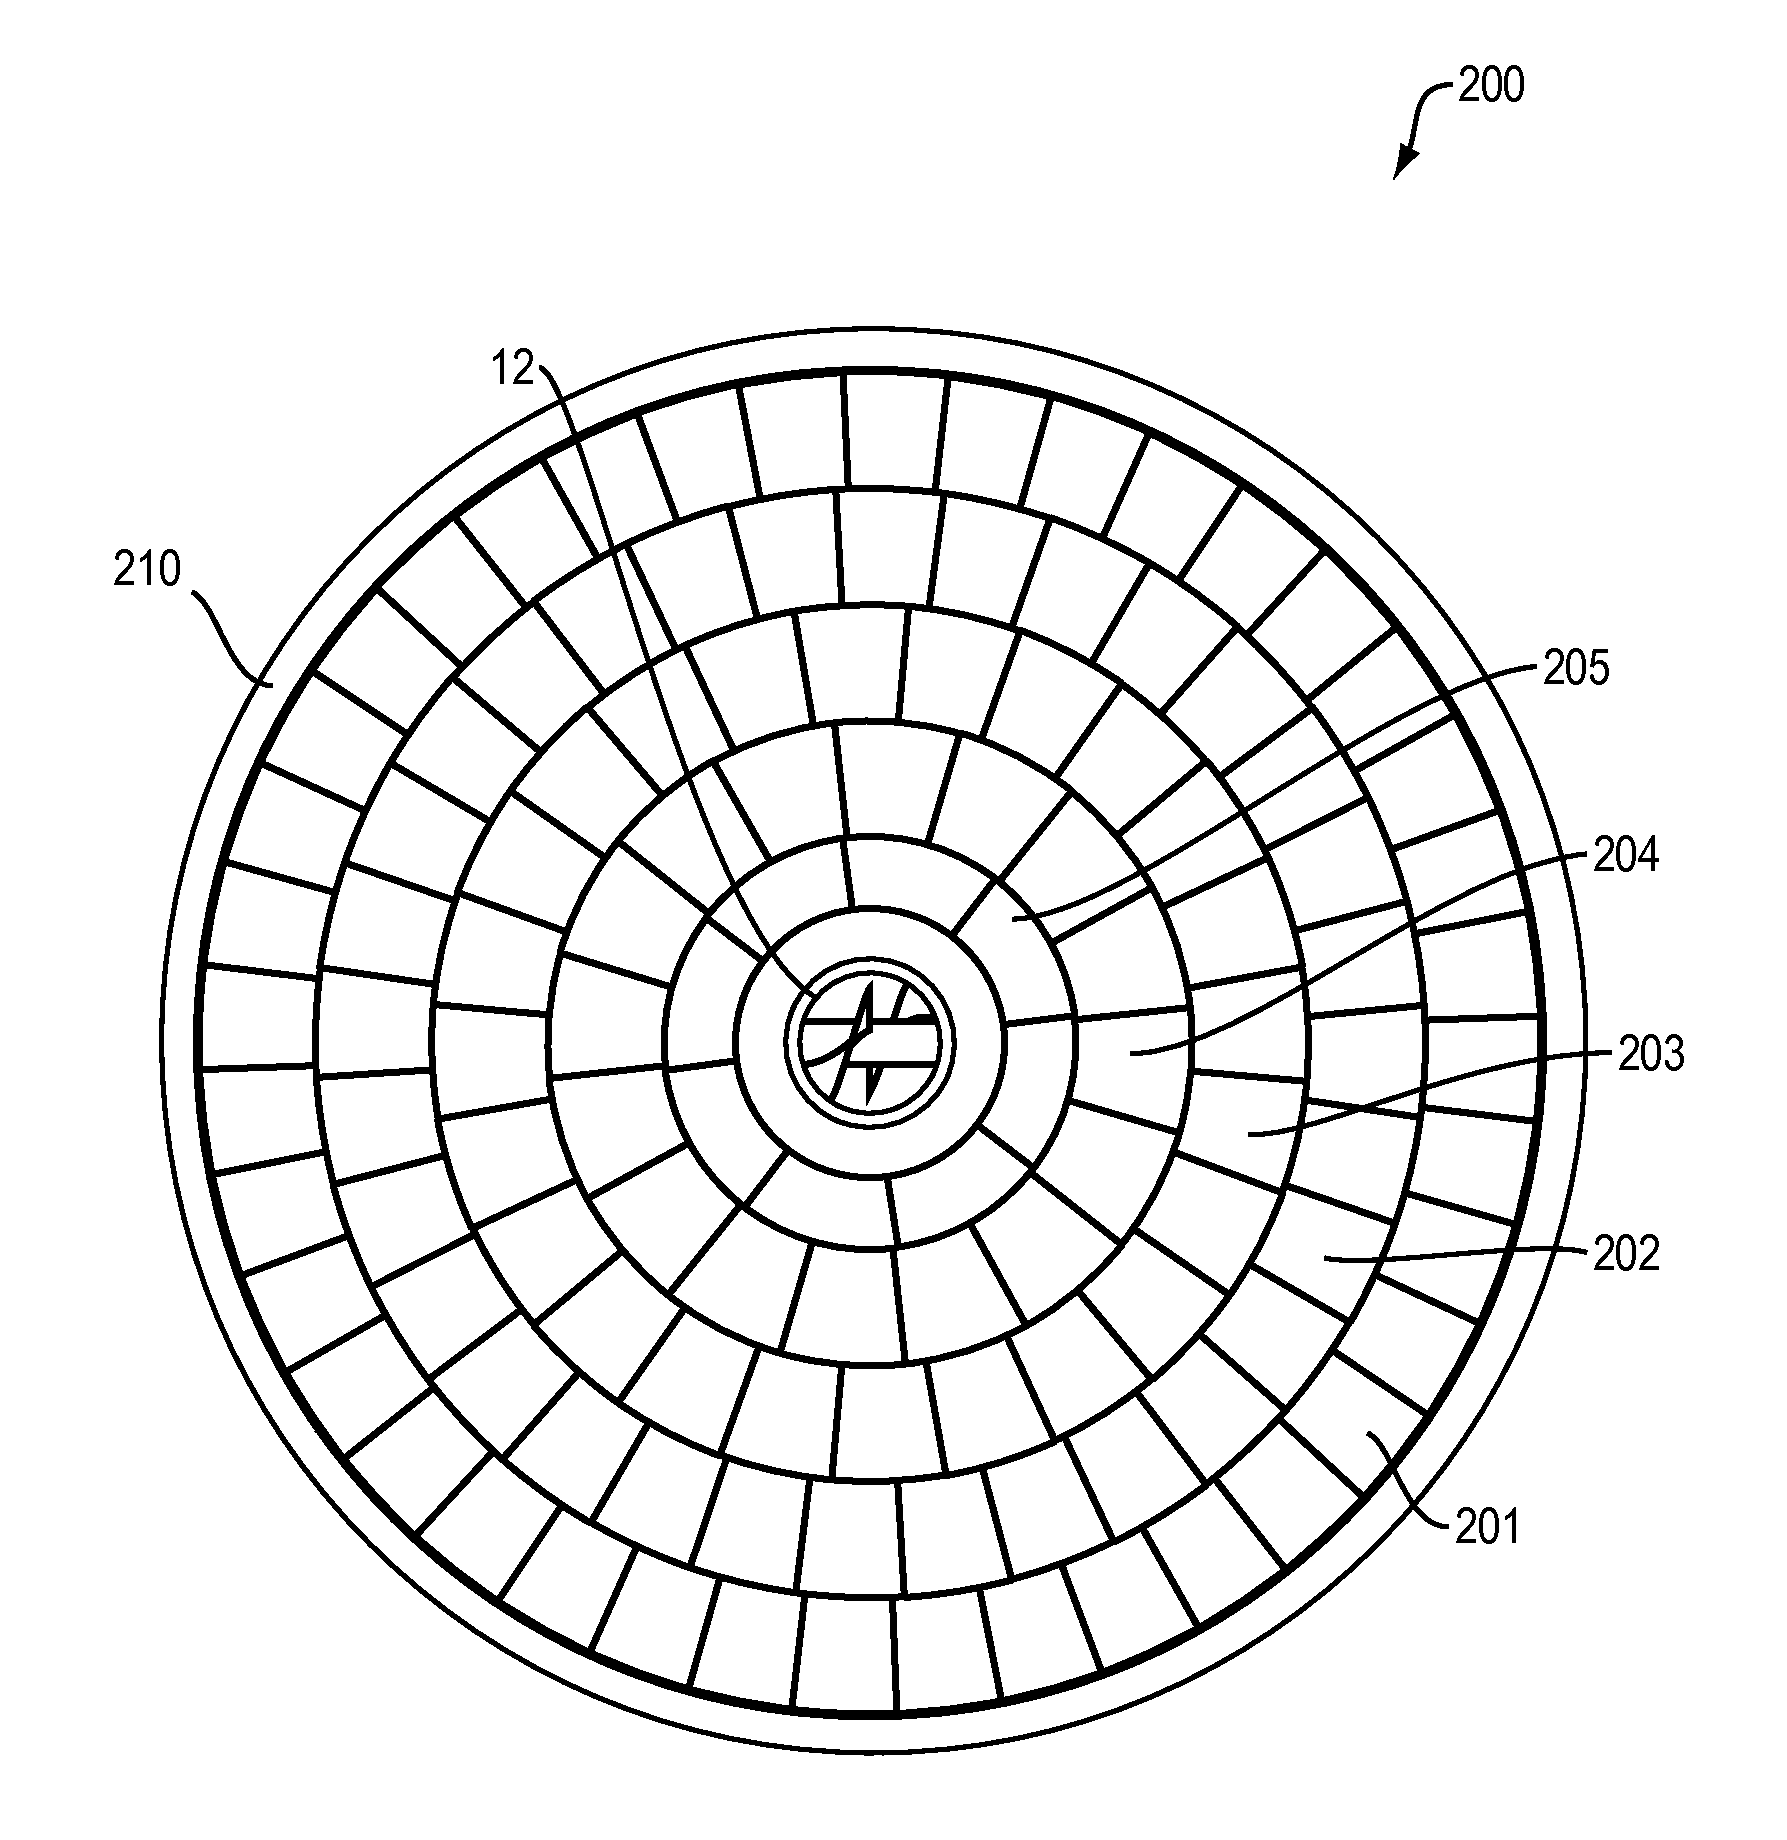 Elevated fixed-grate apparatus for use with multi-fuel furnaces